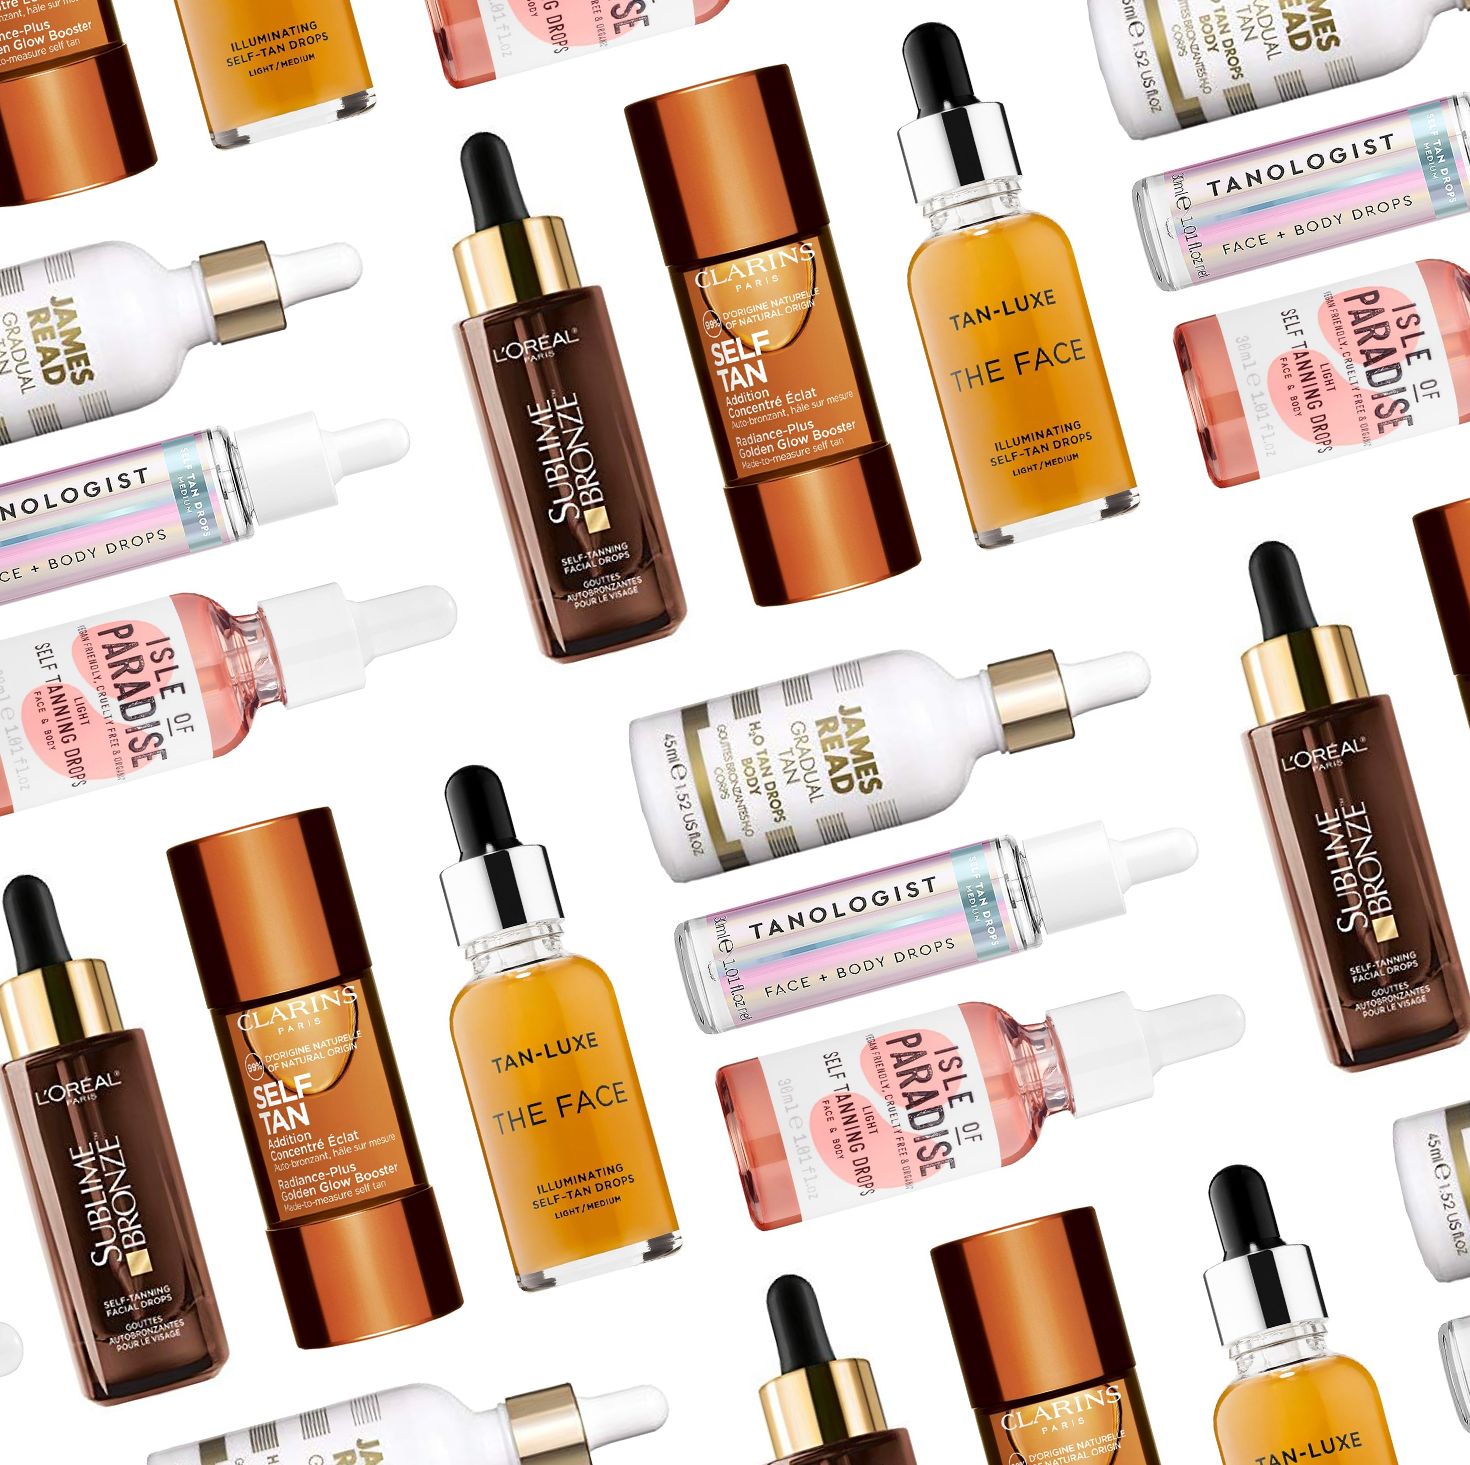 Get Your Faux Glow on With These Fan-Favorite Self-Tanning Drops